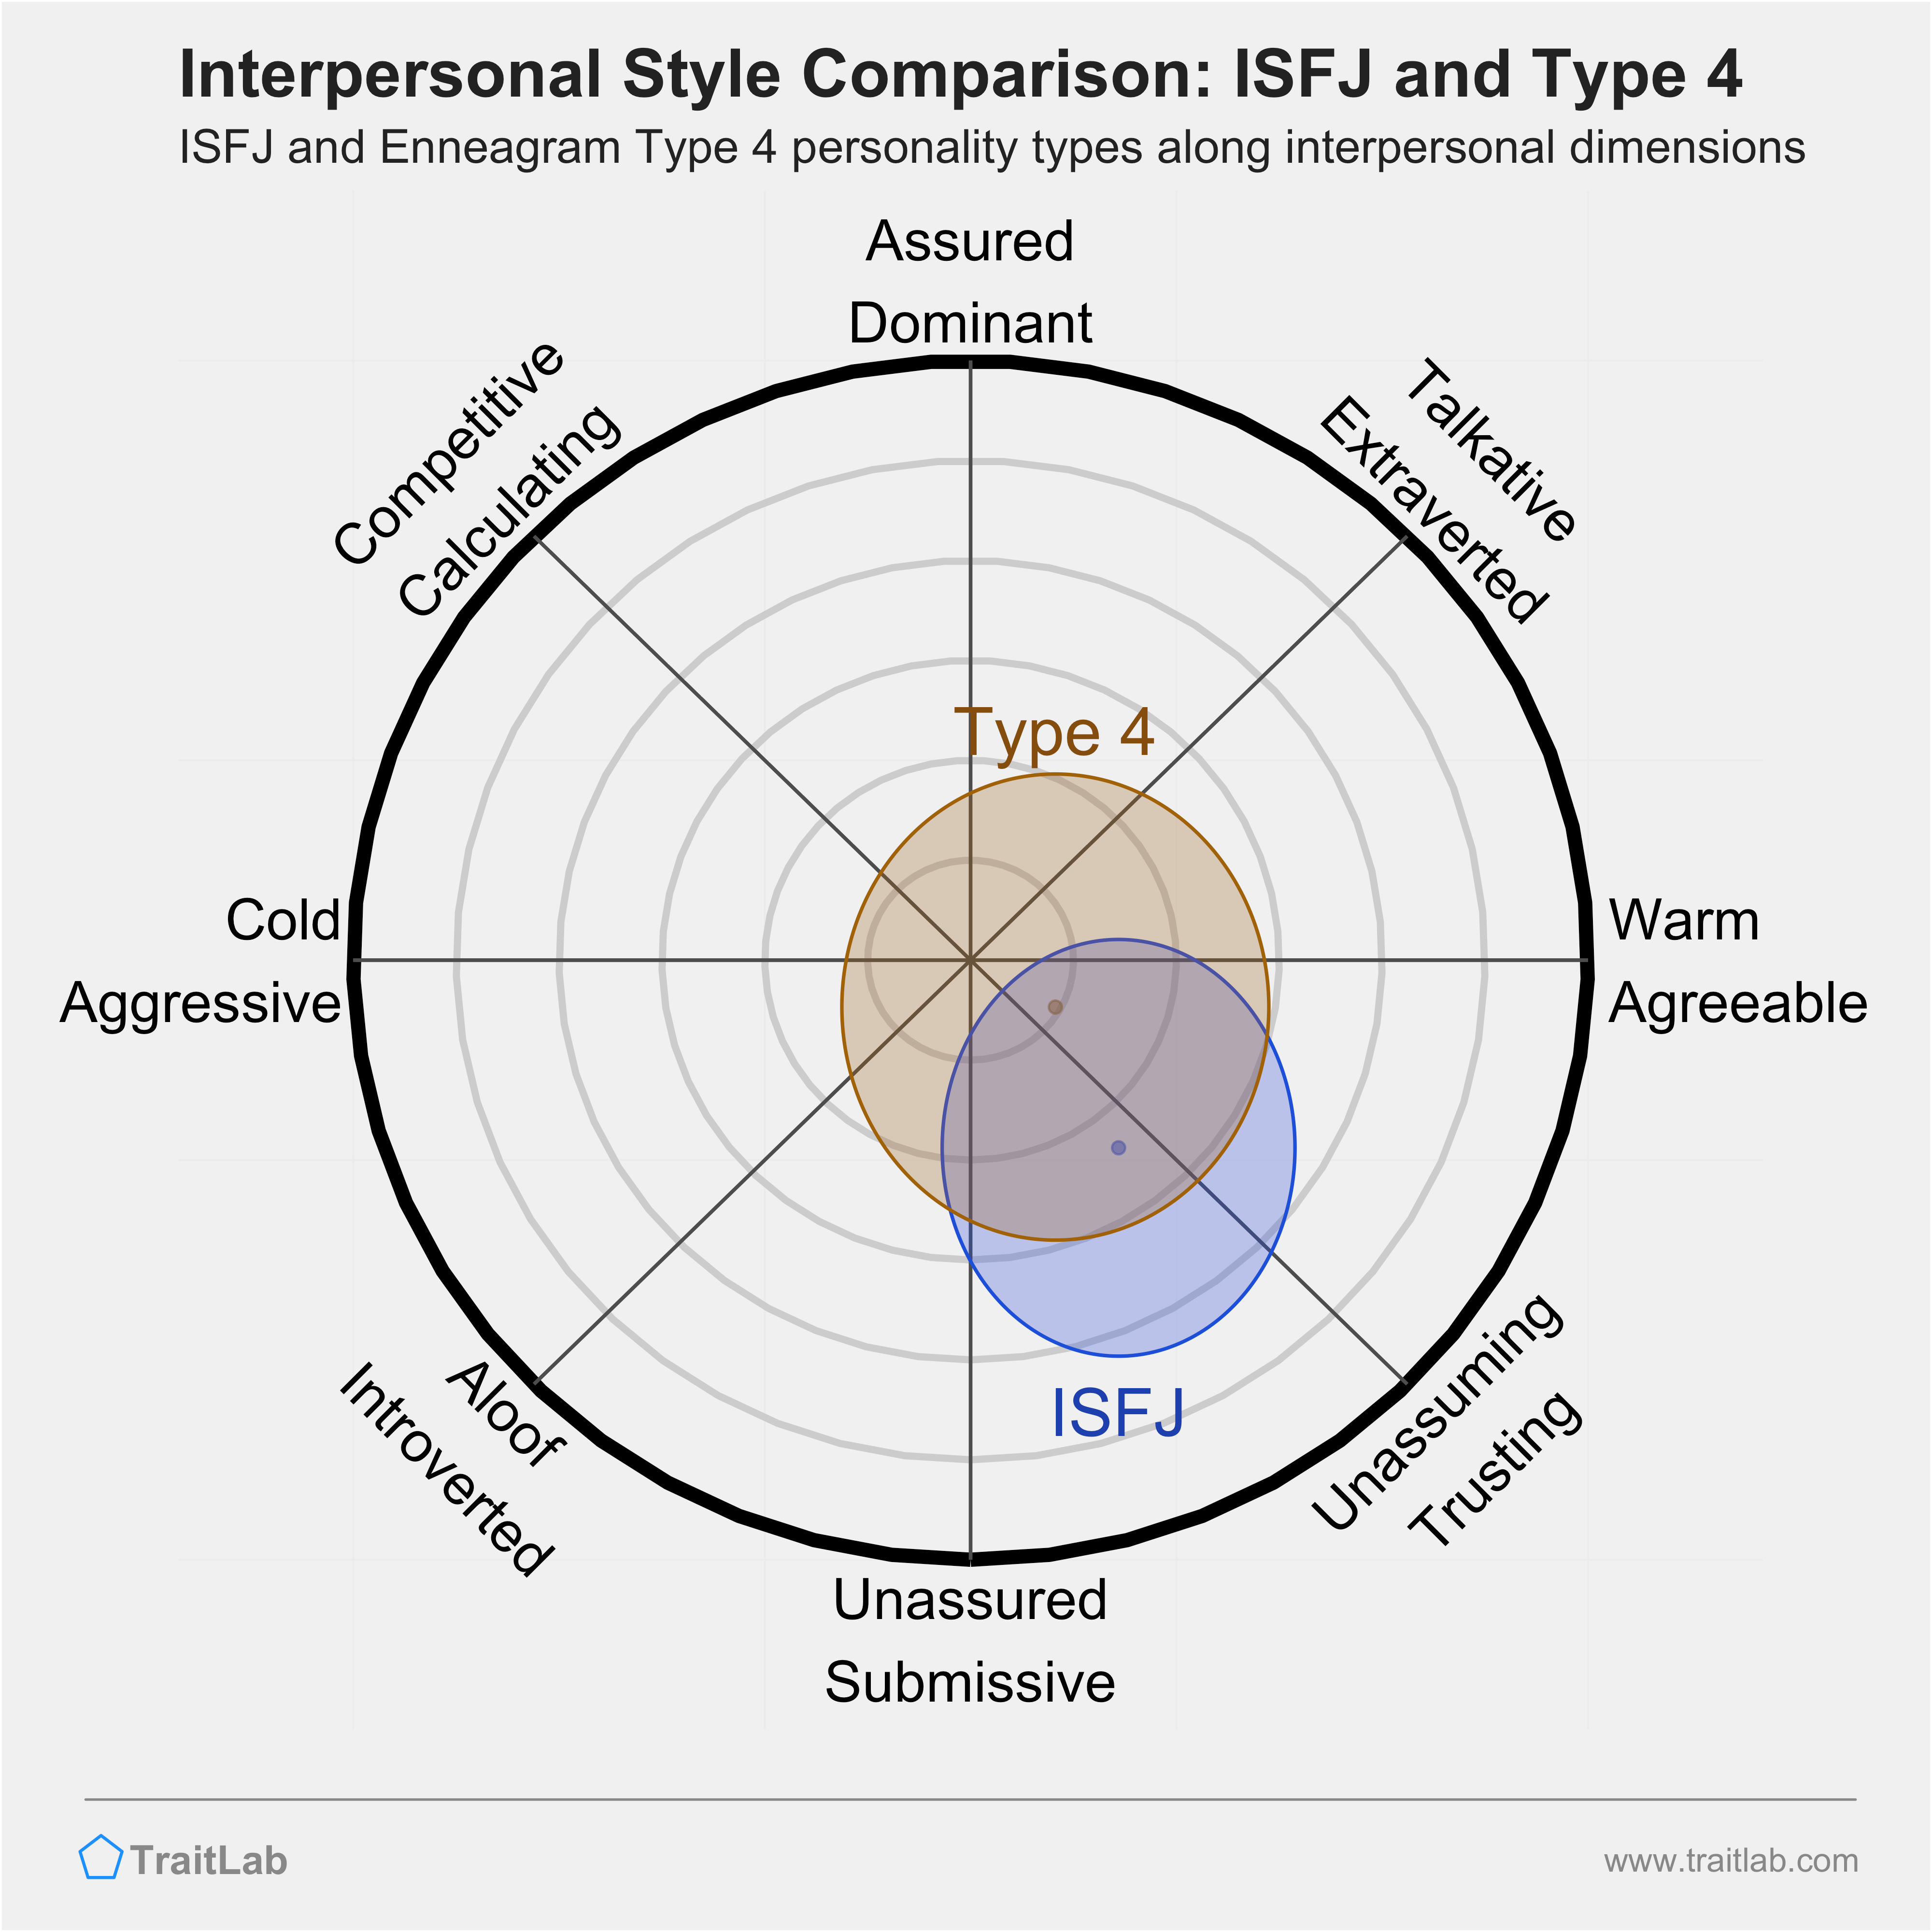 Enneagram ISFJ and Type 4 comparison across interpersonal dimensions